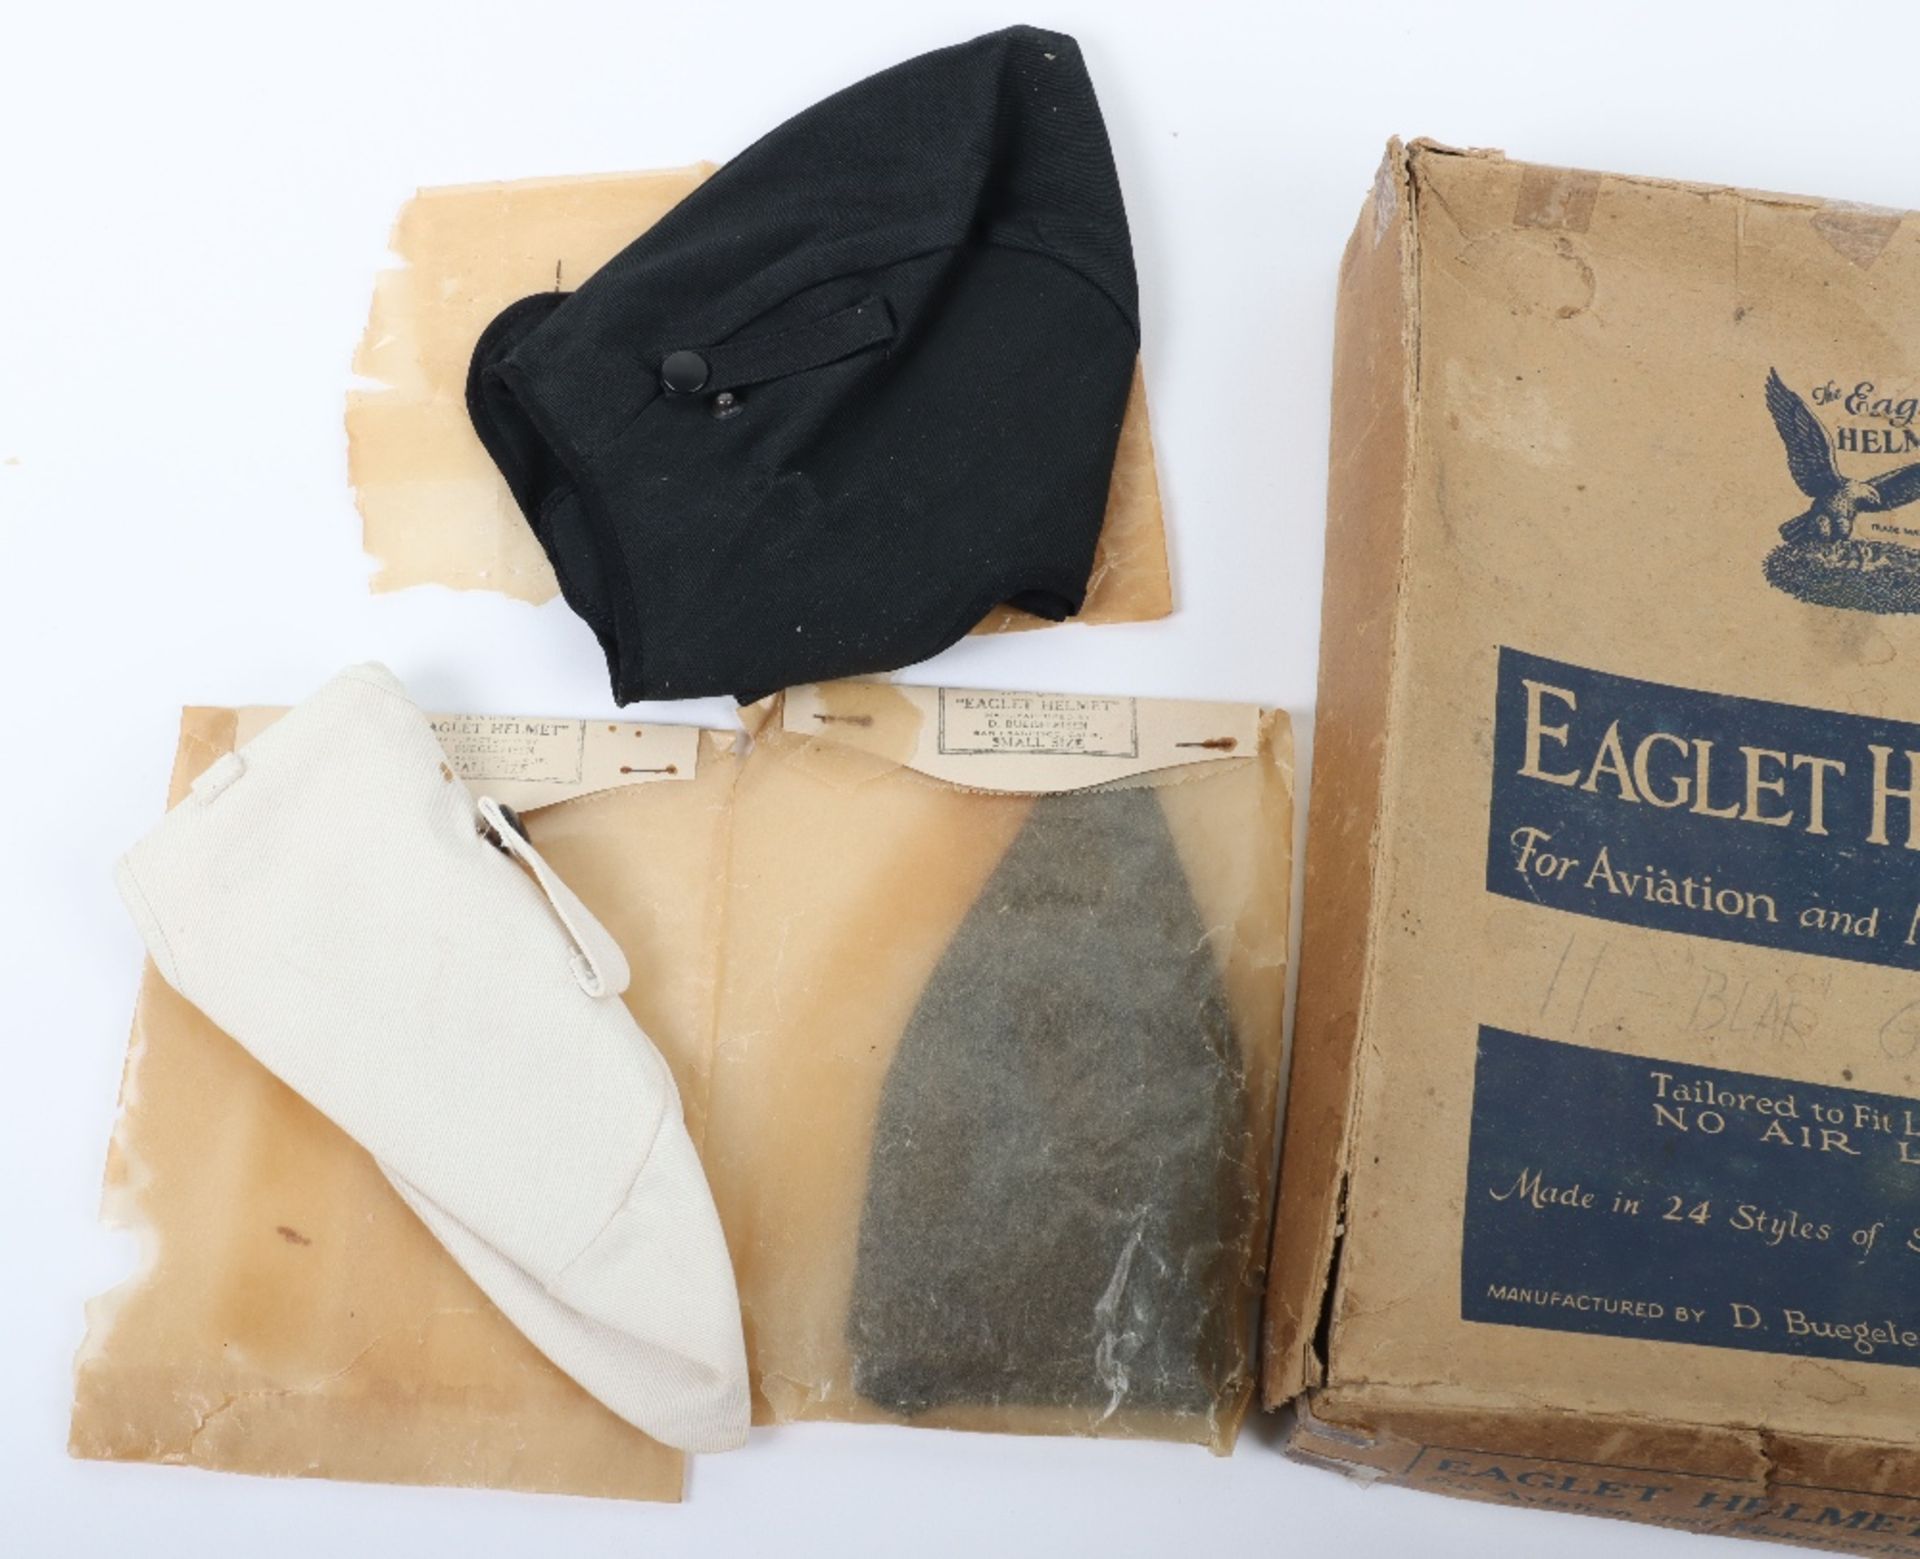 Trade Box for Eagle Helmets - Image 4 of 6